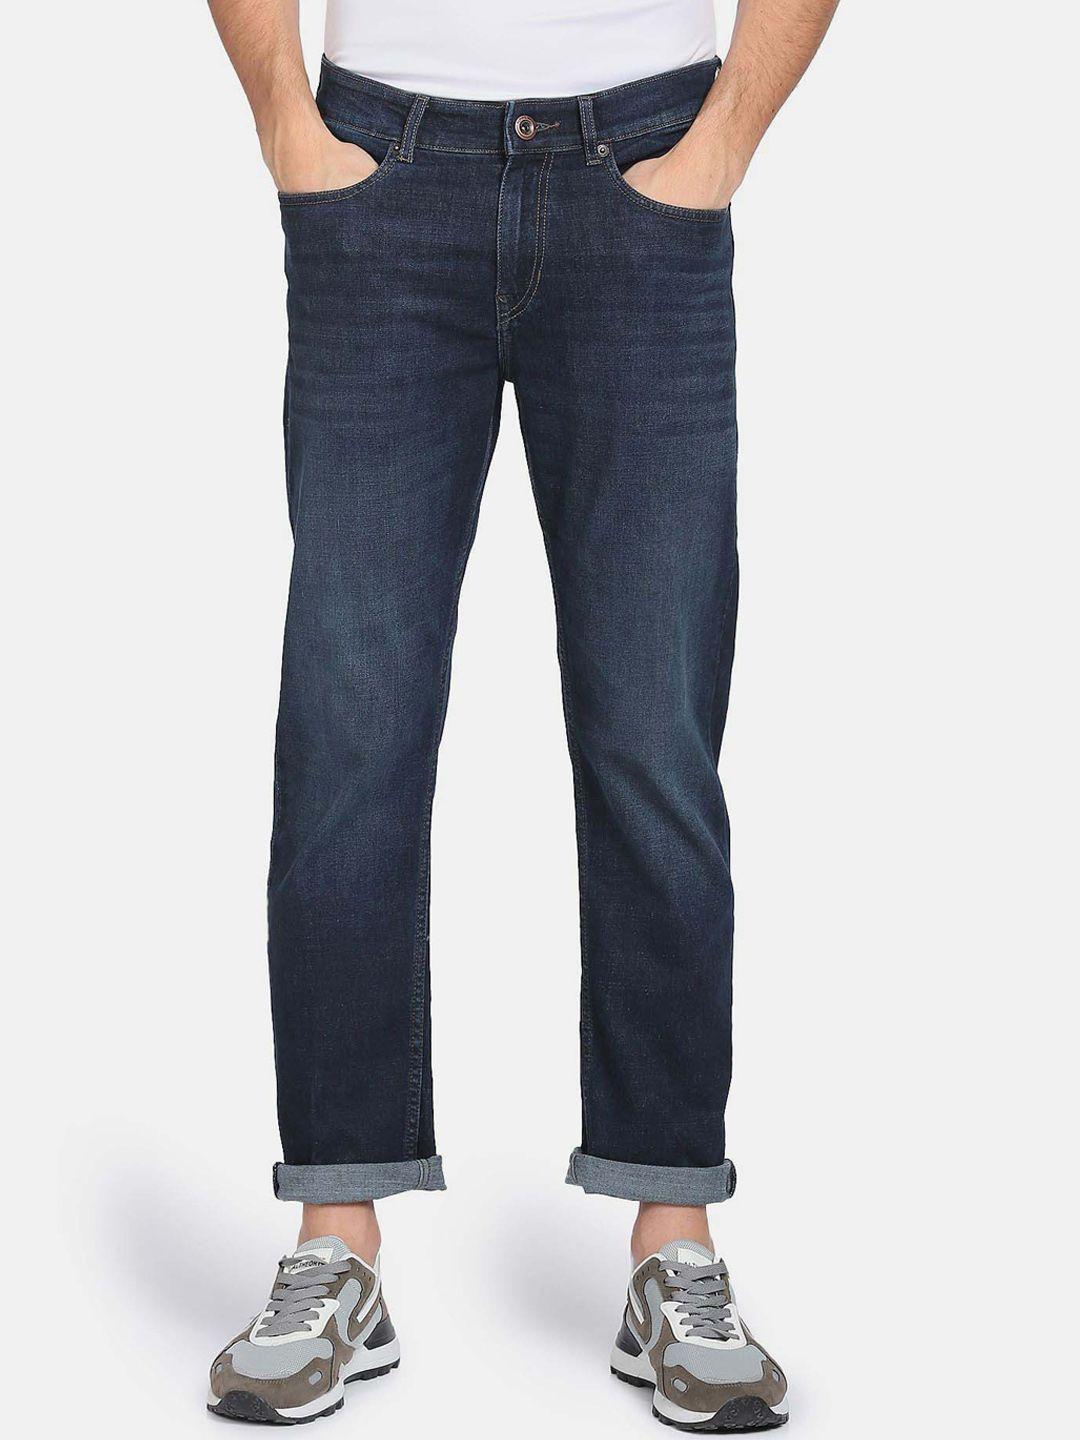 flying machine men mid rise light fade jeans